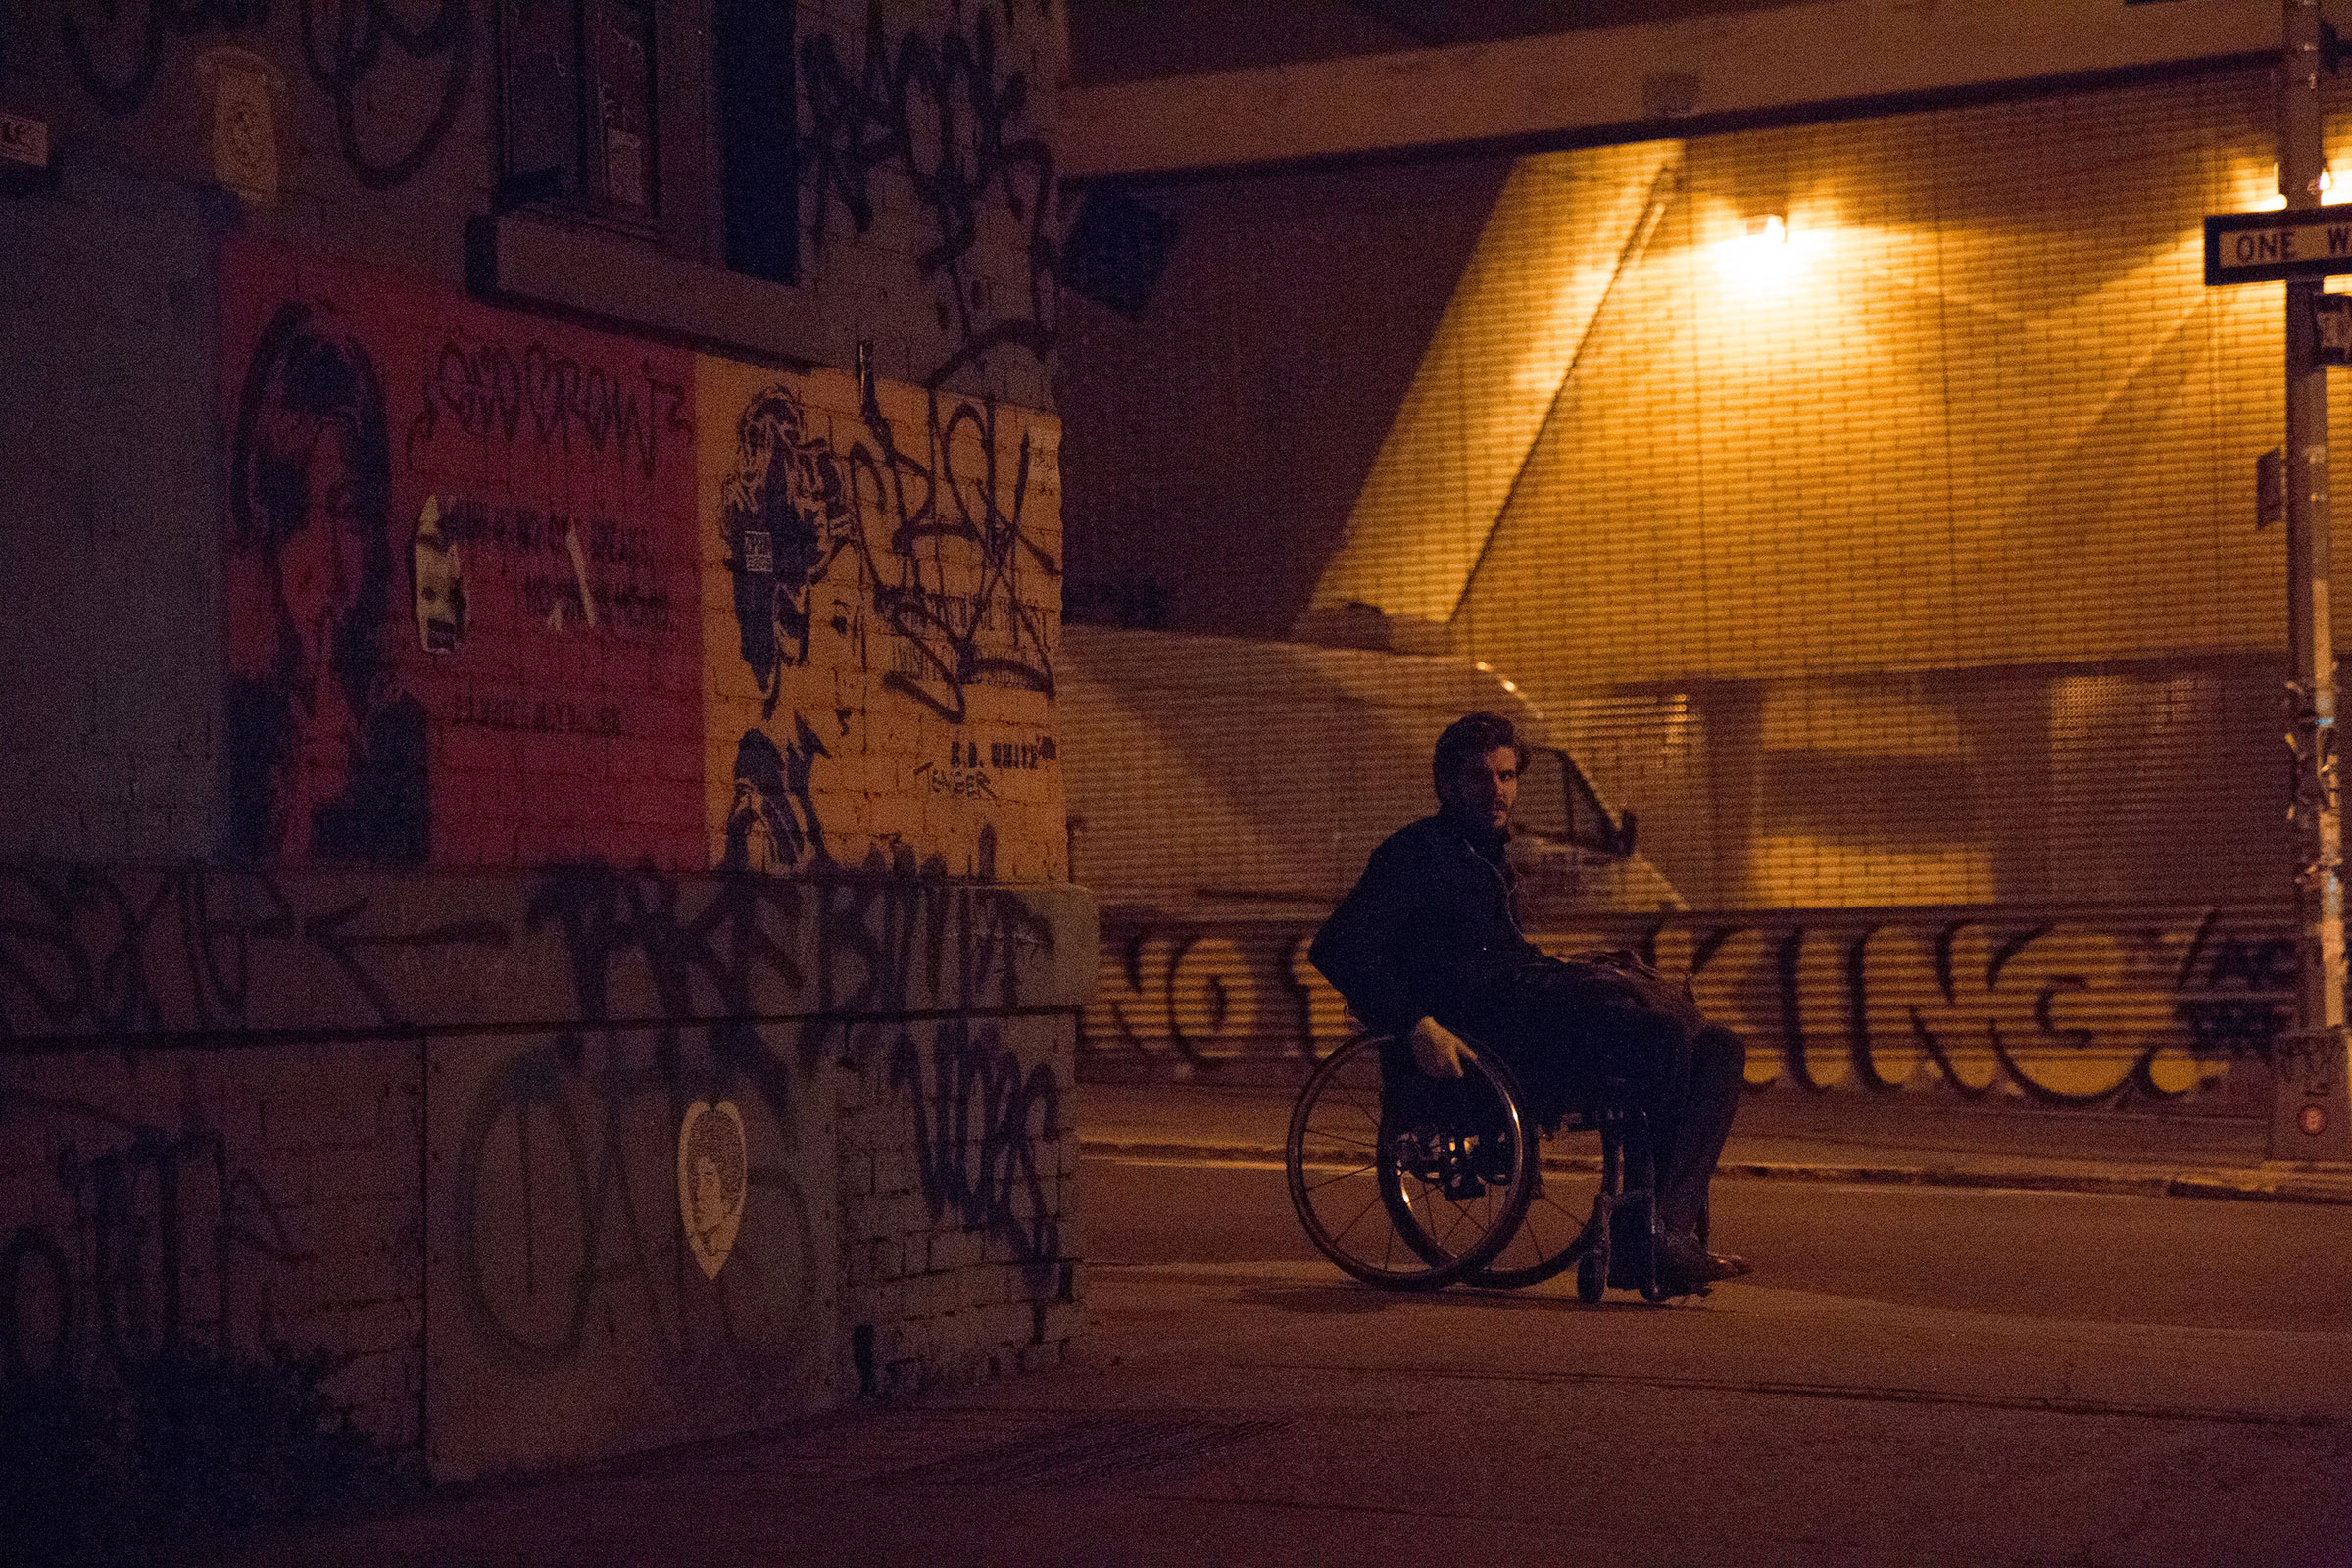  B.D. White severed his spine during a pole-vaulting accident as a teen and can't use his legs, but he doesn't let his disability hinder his passion for street art. Under the cover of darkness, the 31-year-old artist goes to the areas of Brooklyn, NY